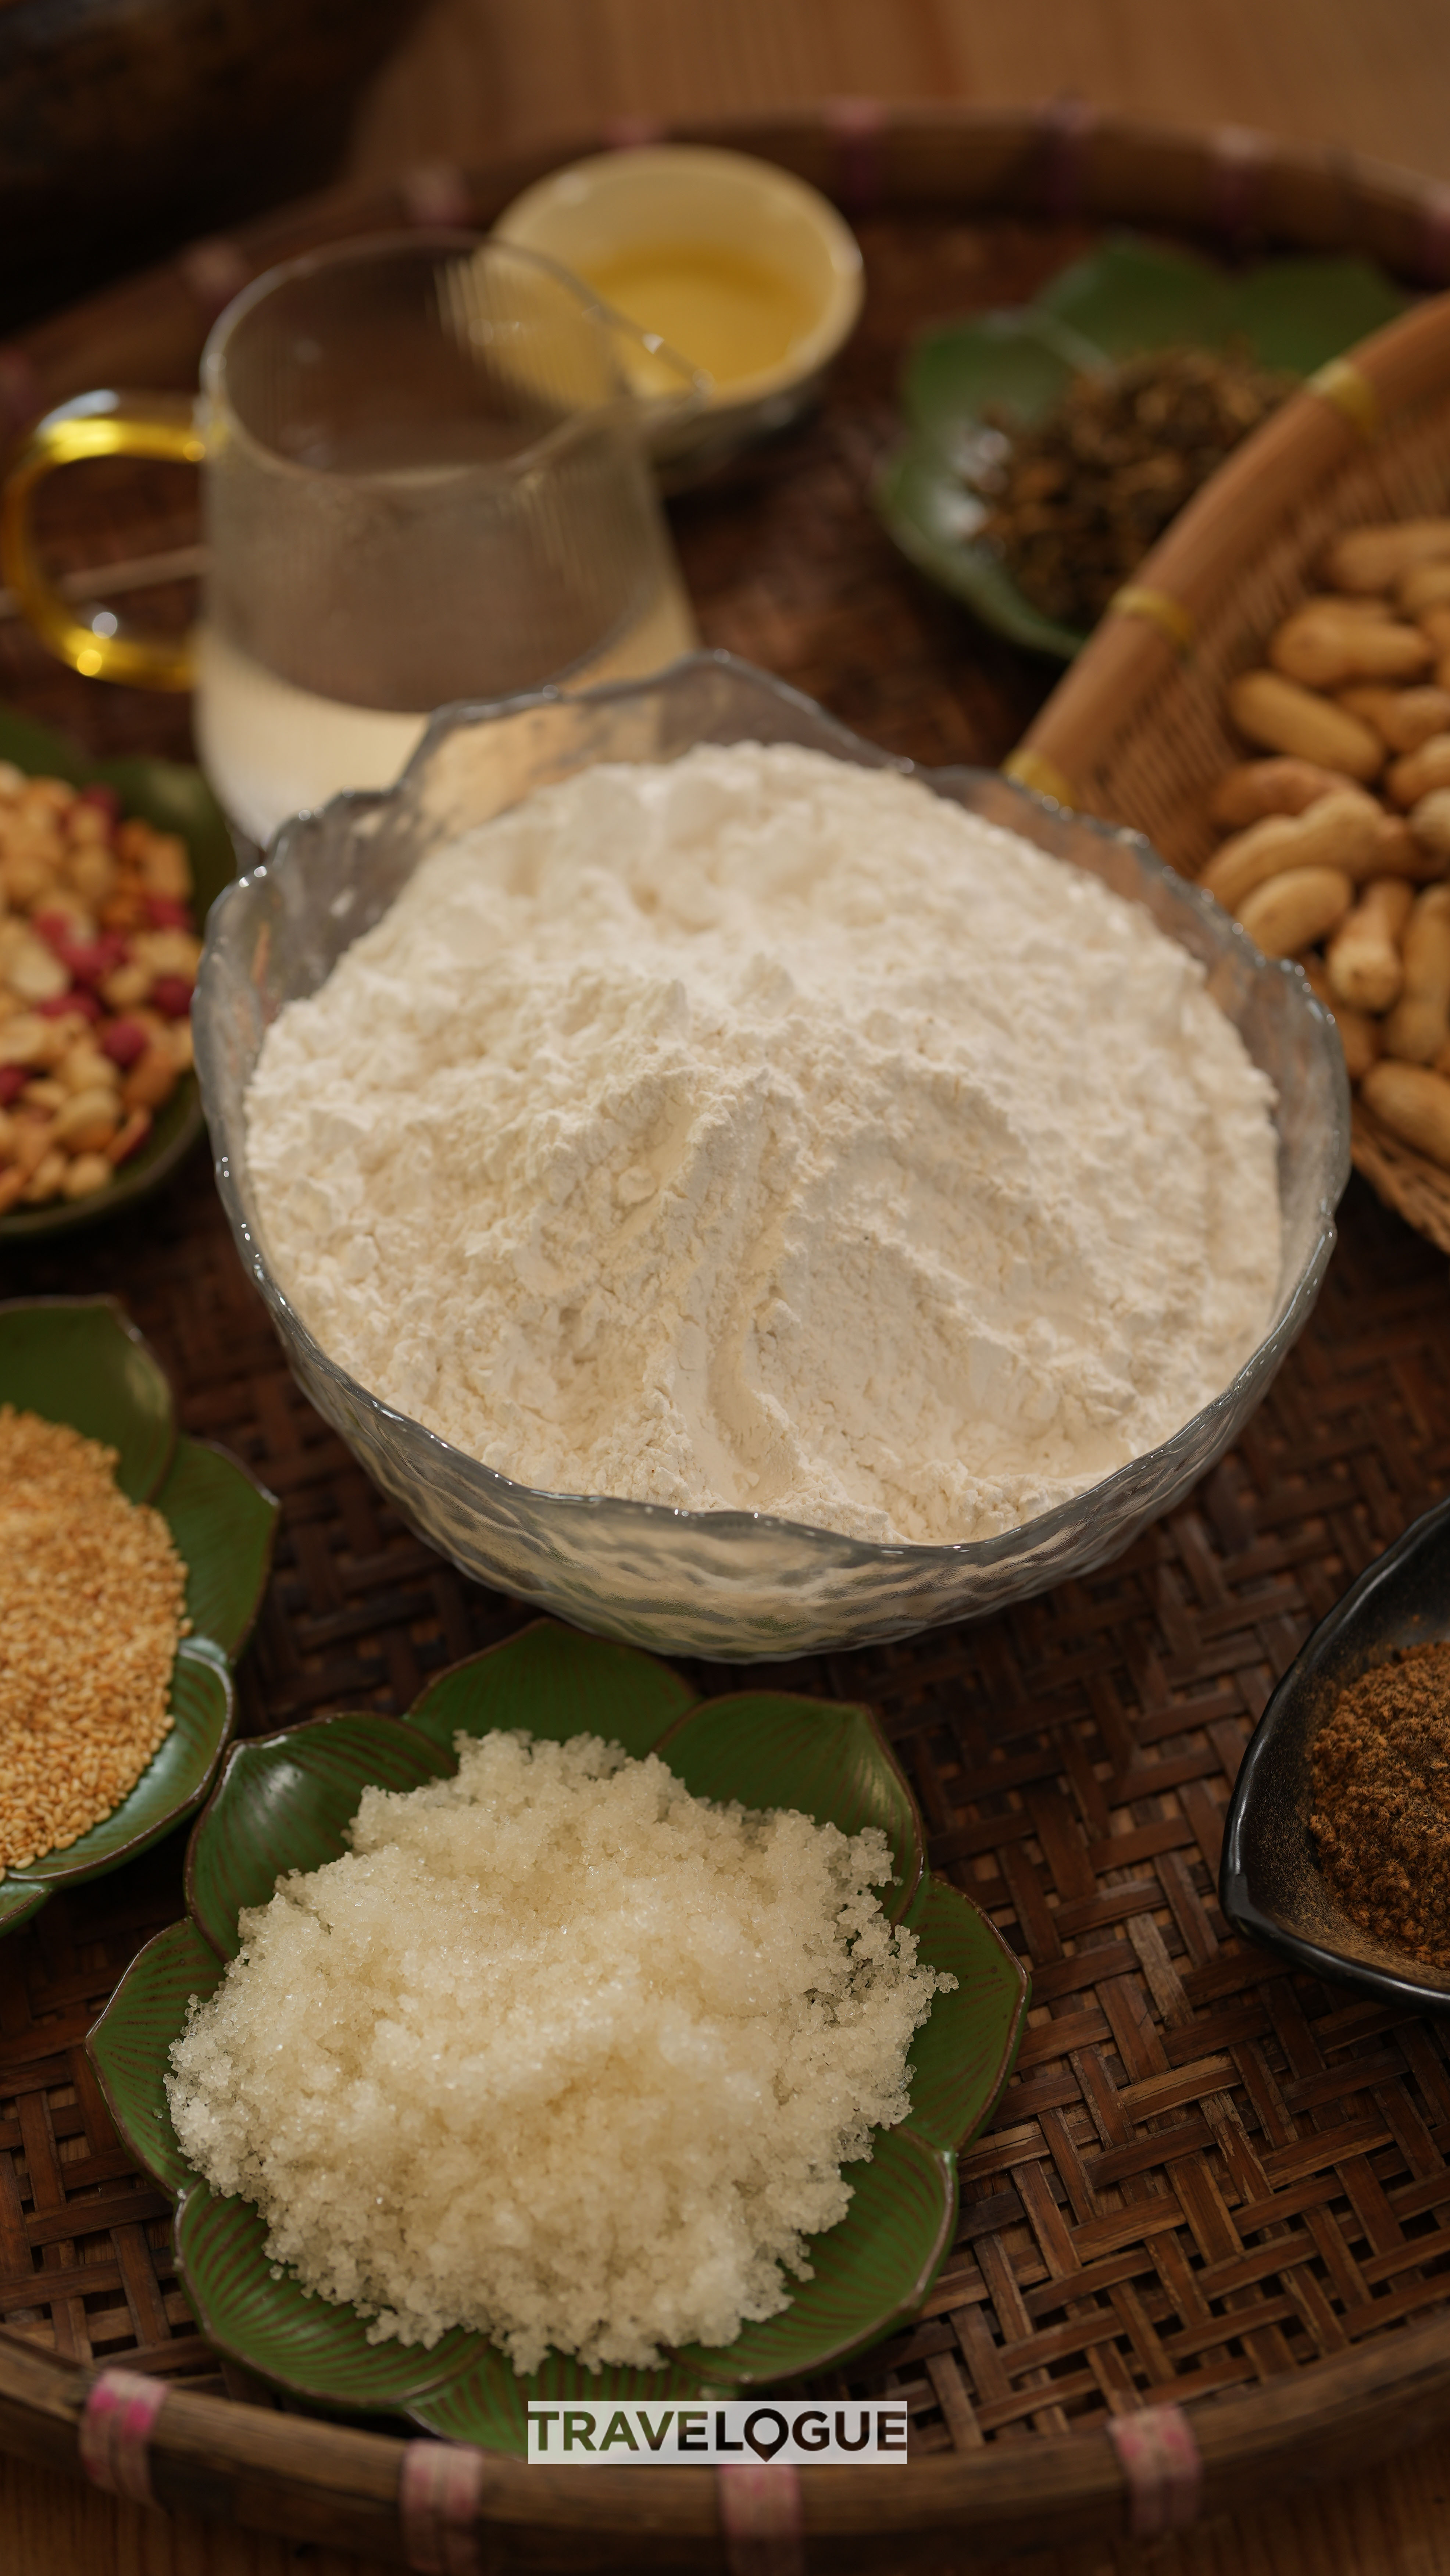 An undated photo shows the ingredients for ciba, a sweet snack from Shaoguan, Guangdong Province. /CGTN